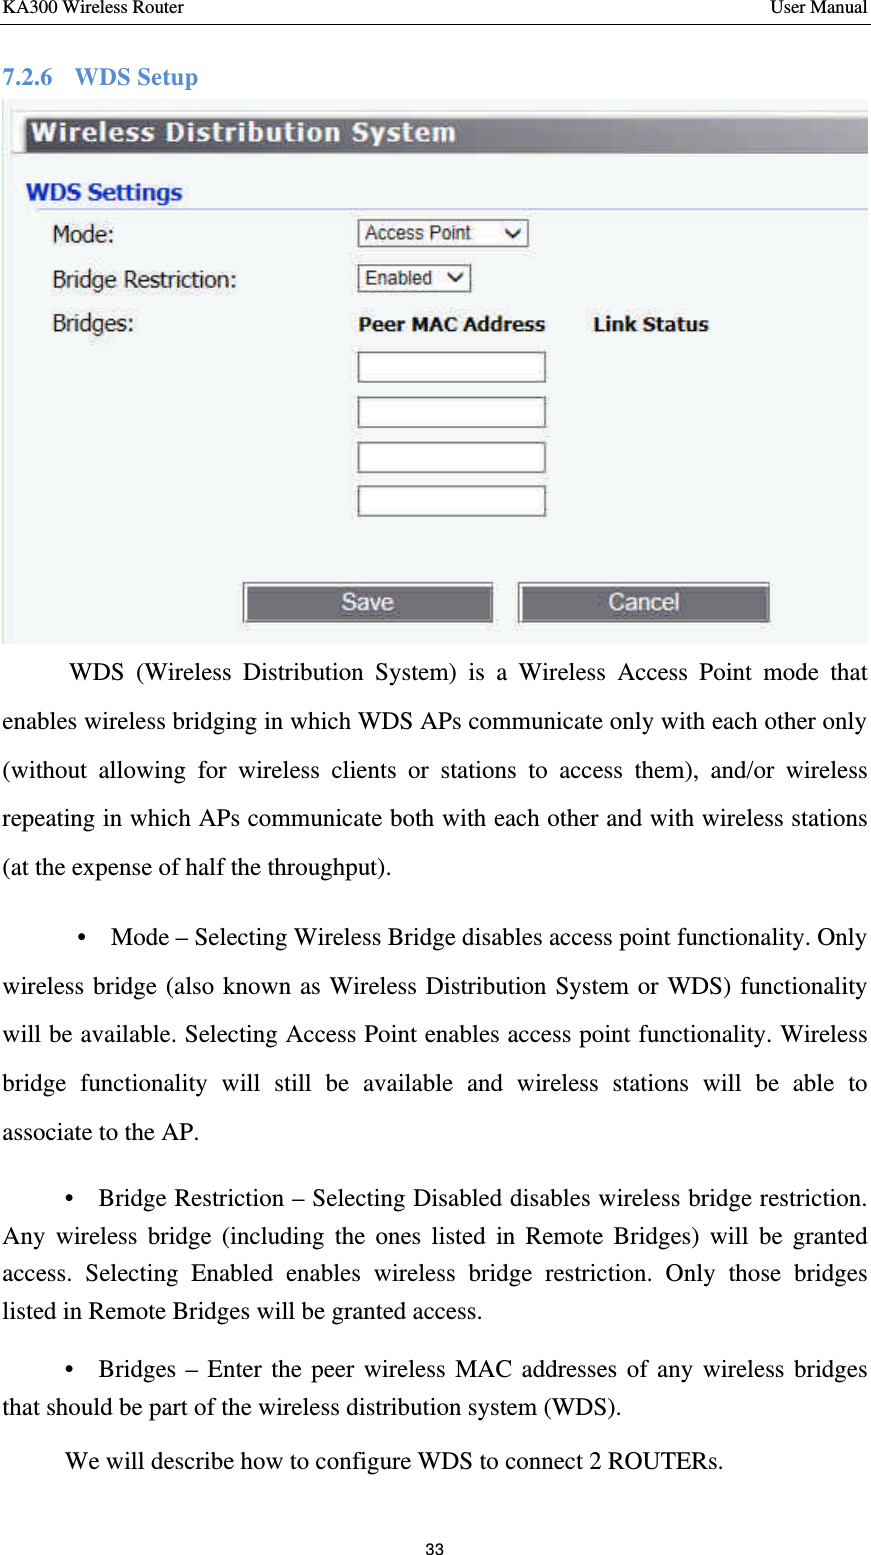 KA300 Wireless Router       User Manual 33  7.2.6  WDS Setup     WDS (Wireless Distribution System) is a Wireless Access Point mode that enables wireless bridging in which WDS APs communicate only with each other only (without allowing for wireless clients or stations to access them), and/or wireless repeating in which APs communicate both with each other and with wireless stations (at the expense of half the throughput).   •  Mode – Selecting Wireless Bridge disables access point functionality. Only wireless bridge (also known as Wireless Distribution System or WDS) functionality will be available. Selecting Access Point enables access point functionality. Wireless bridge functionality will still be available and wireless stations will be able to associate to the AP.   •  Bridge Restriction – Selecting Disabled disables wireless bridge restriction. Any wireless bridge (including the ones listed in Remote Bridges) will be granted access. Selecting Enabled enables wireless bridge restriction. Only those bridges listed in Remote Bridges will be granted access.   •  Bridges – Enter the peer wireless MAC addresses of any wireless bridges that should be part of the wireless distribution system (WDS). We will describe how to configure WDS to connect 2 ROUTERs.   